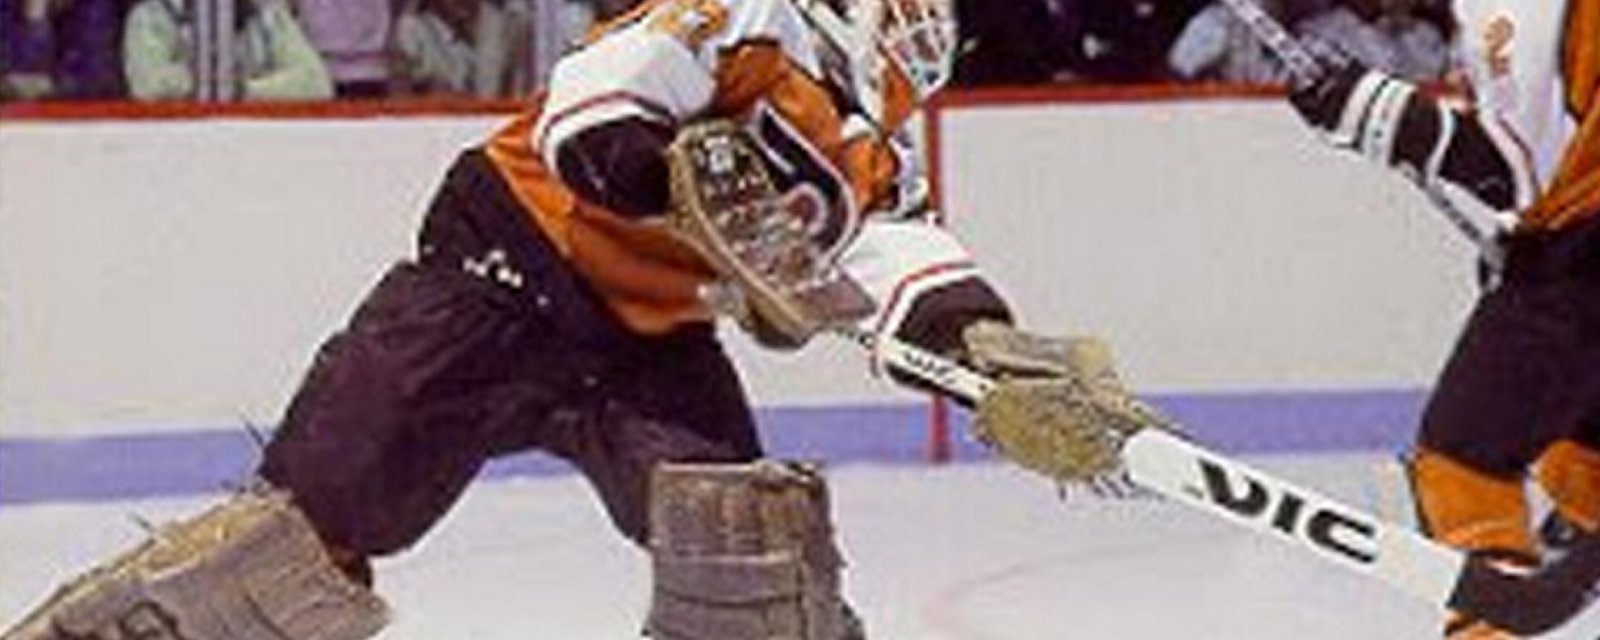 31 years ago today: Hextall becomes the first NHL goalie to shoot &amp;amp; score.